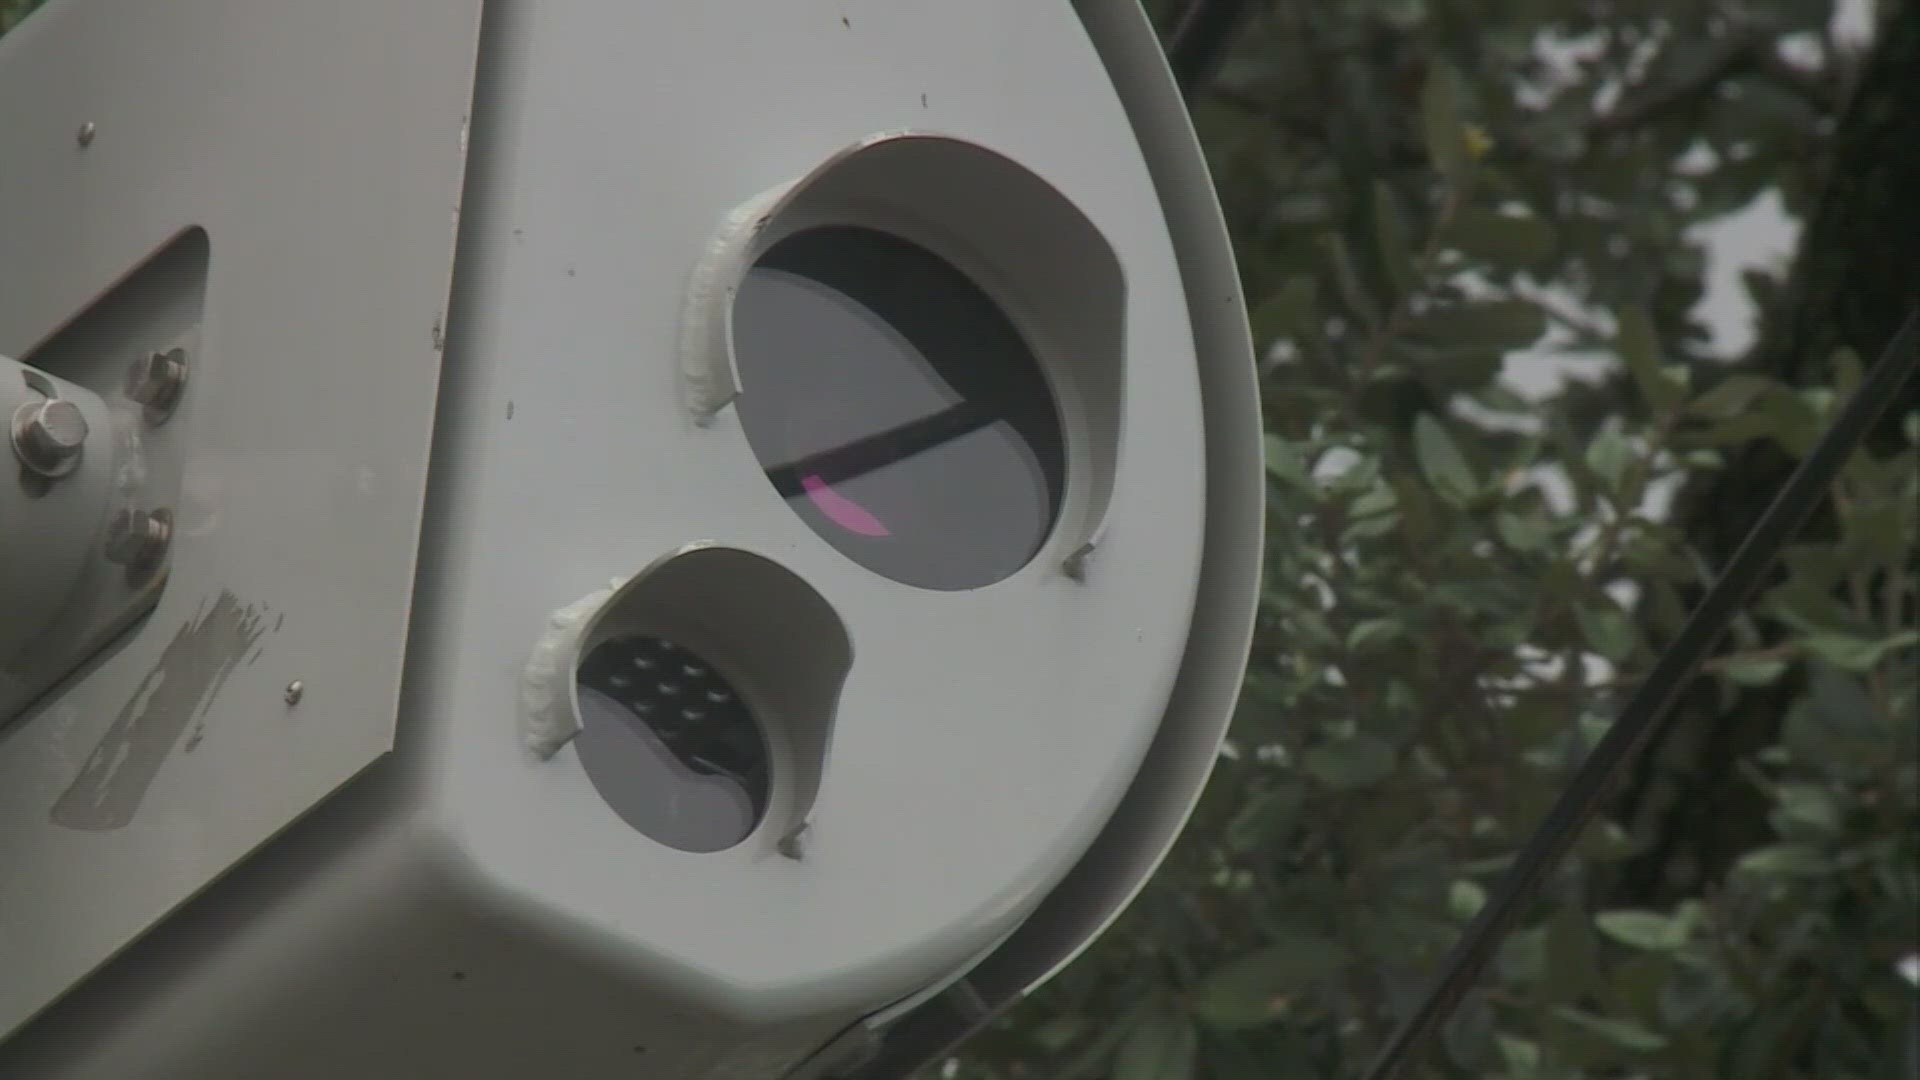 School Zone traffic cameras are being turned back on as well as ten additional traffic cameras that have been deactivated since Hurricane Ida.